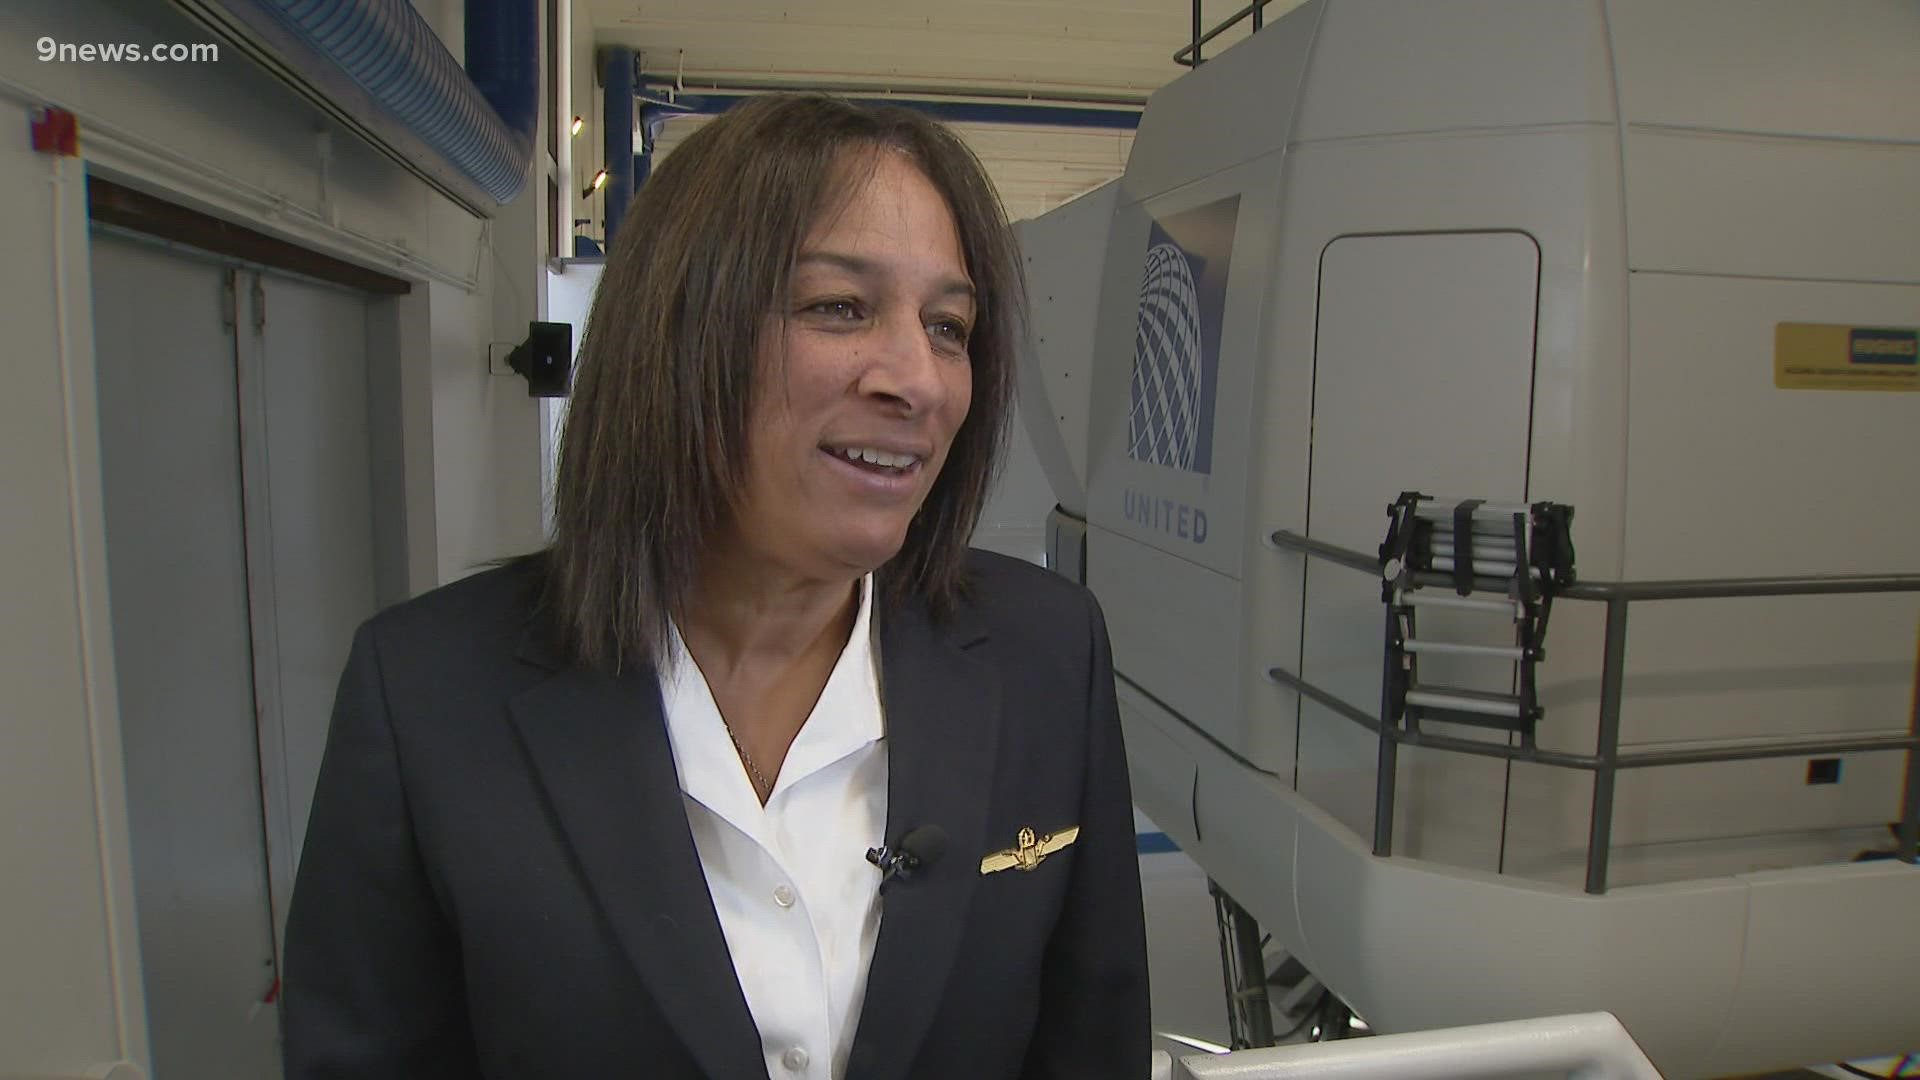 M’Lis Ward is the first Black female captain in the commercial airline industry. She's based in Denver and is making history.